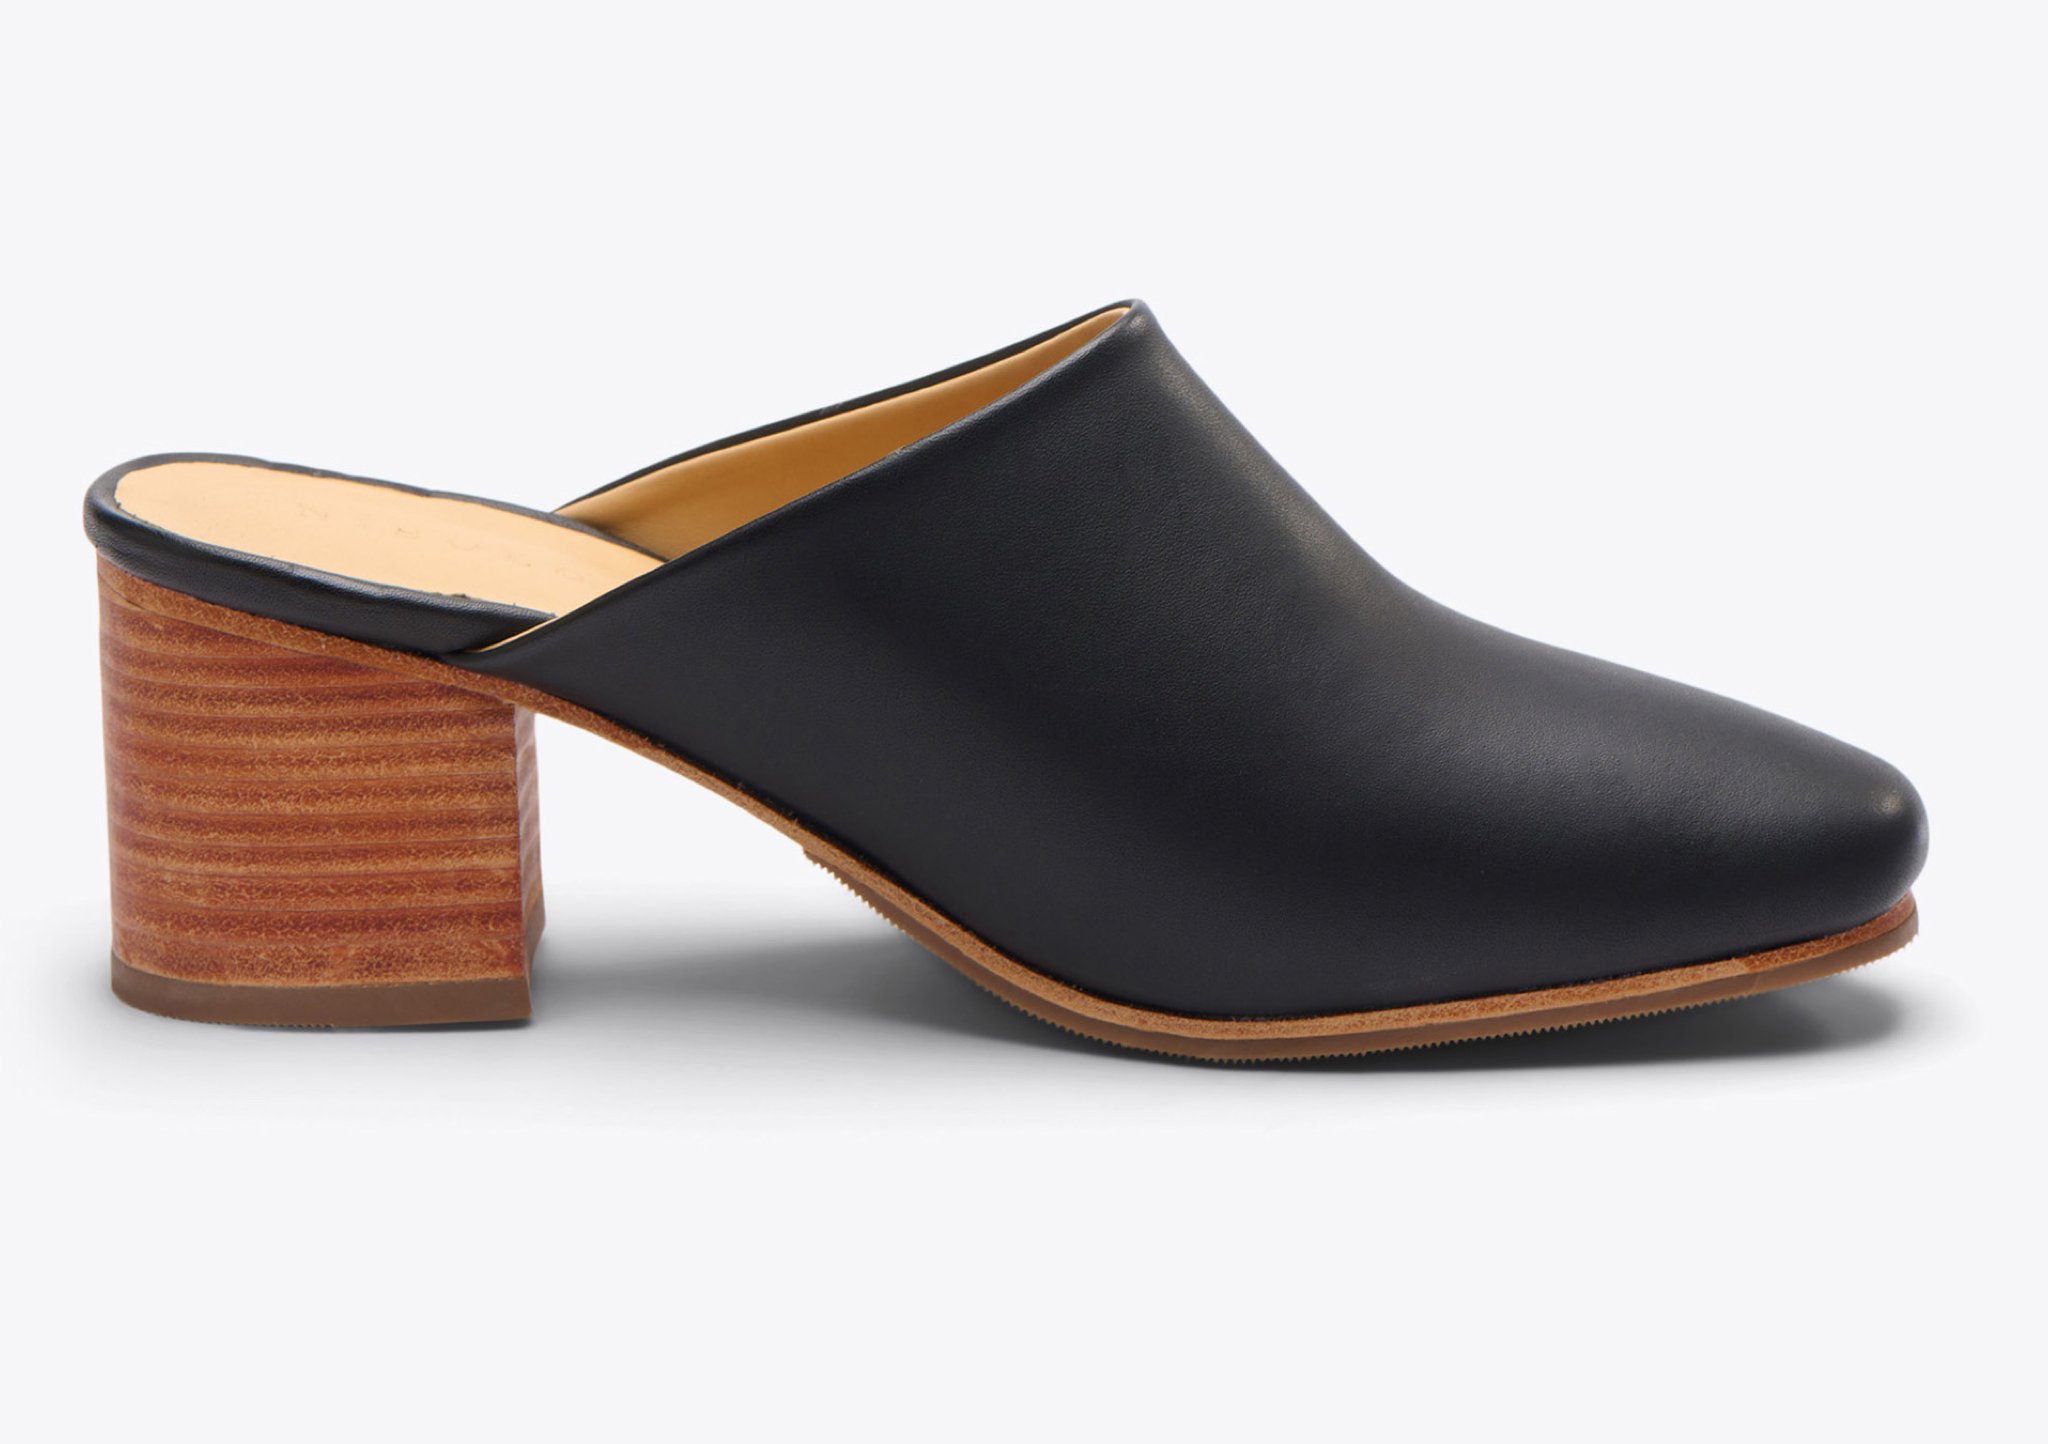 Nisolo All-Day Heeled Mule Black - Every Nisolo product is built on the foundation of comfort, function, and design. 